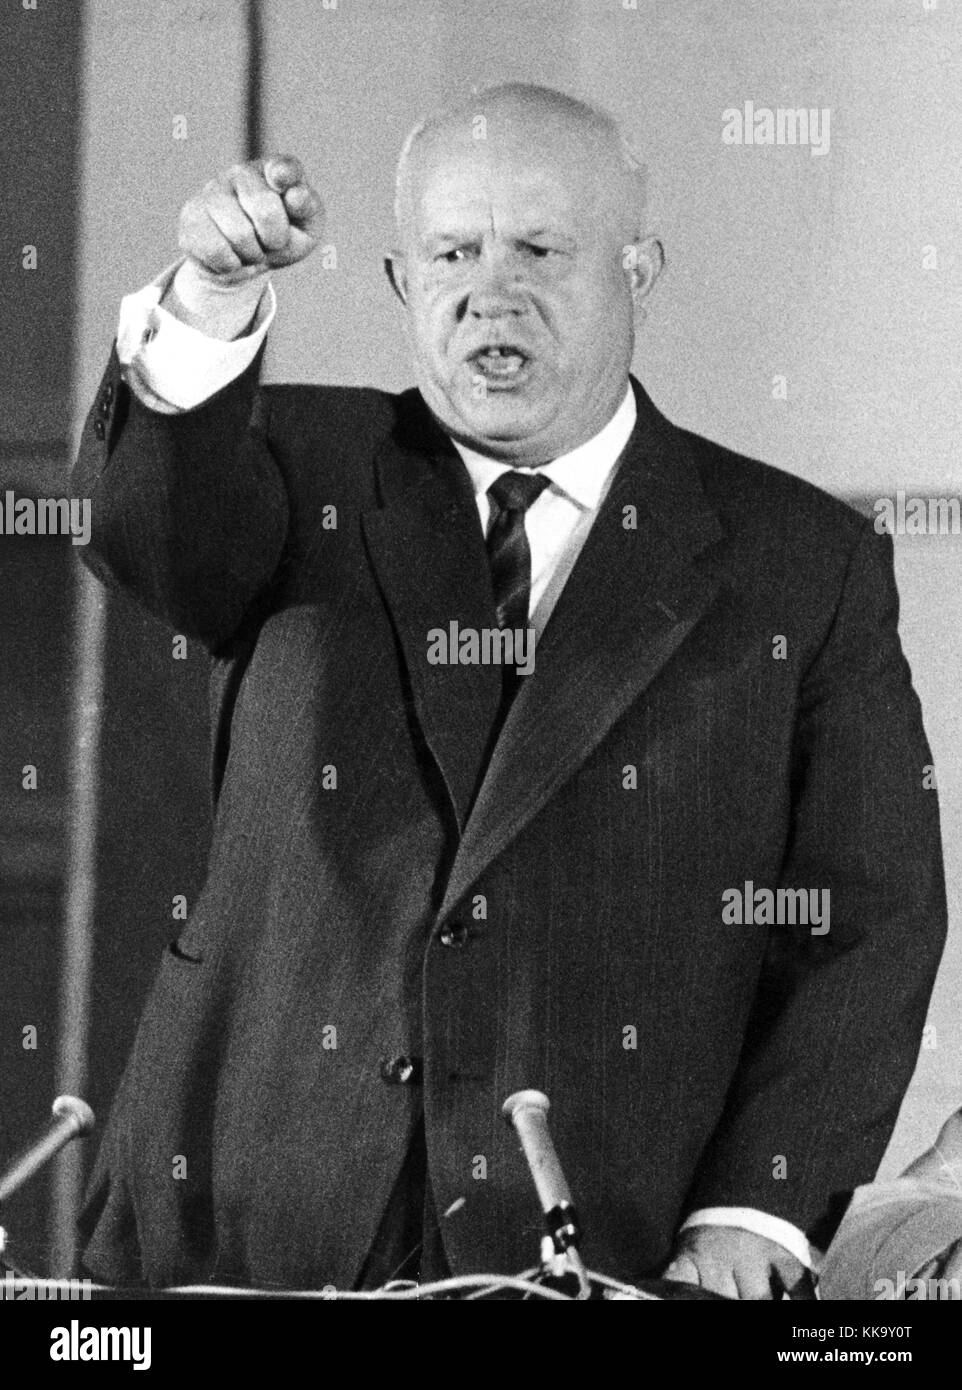 Soviet prime minister Nikita Chruschtschow at press conference in Stock  Photo - Alamy